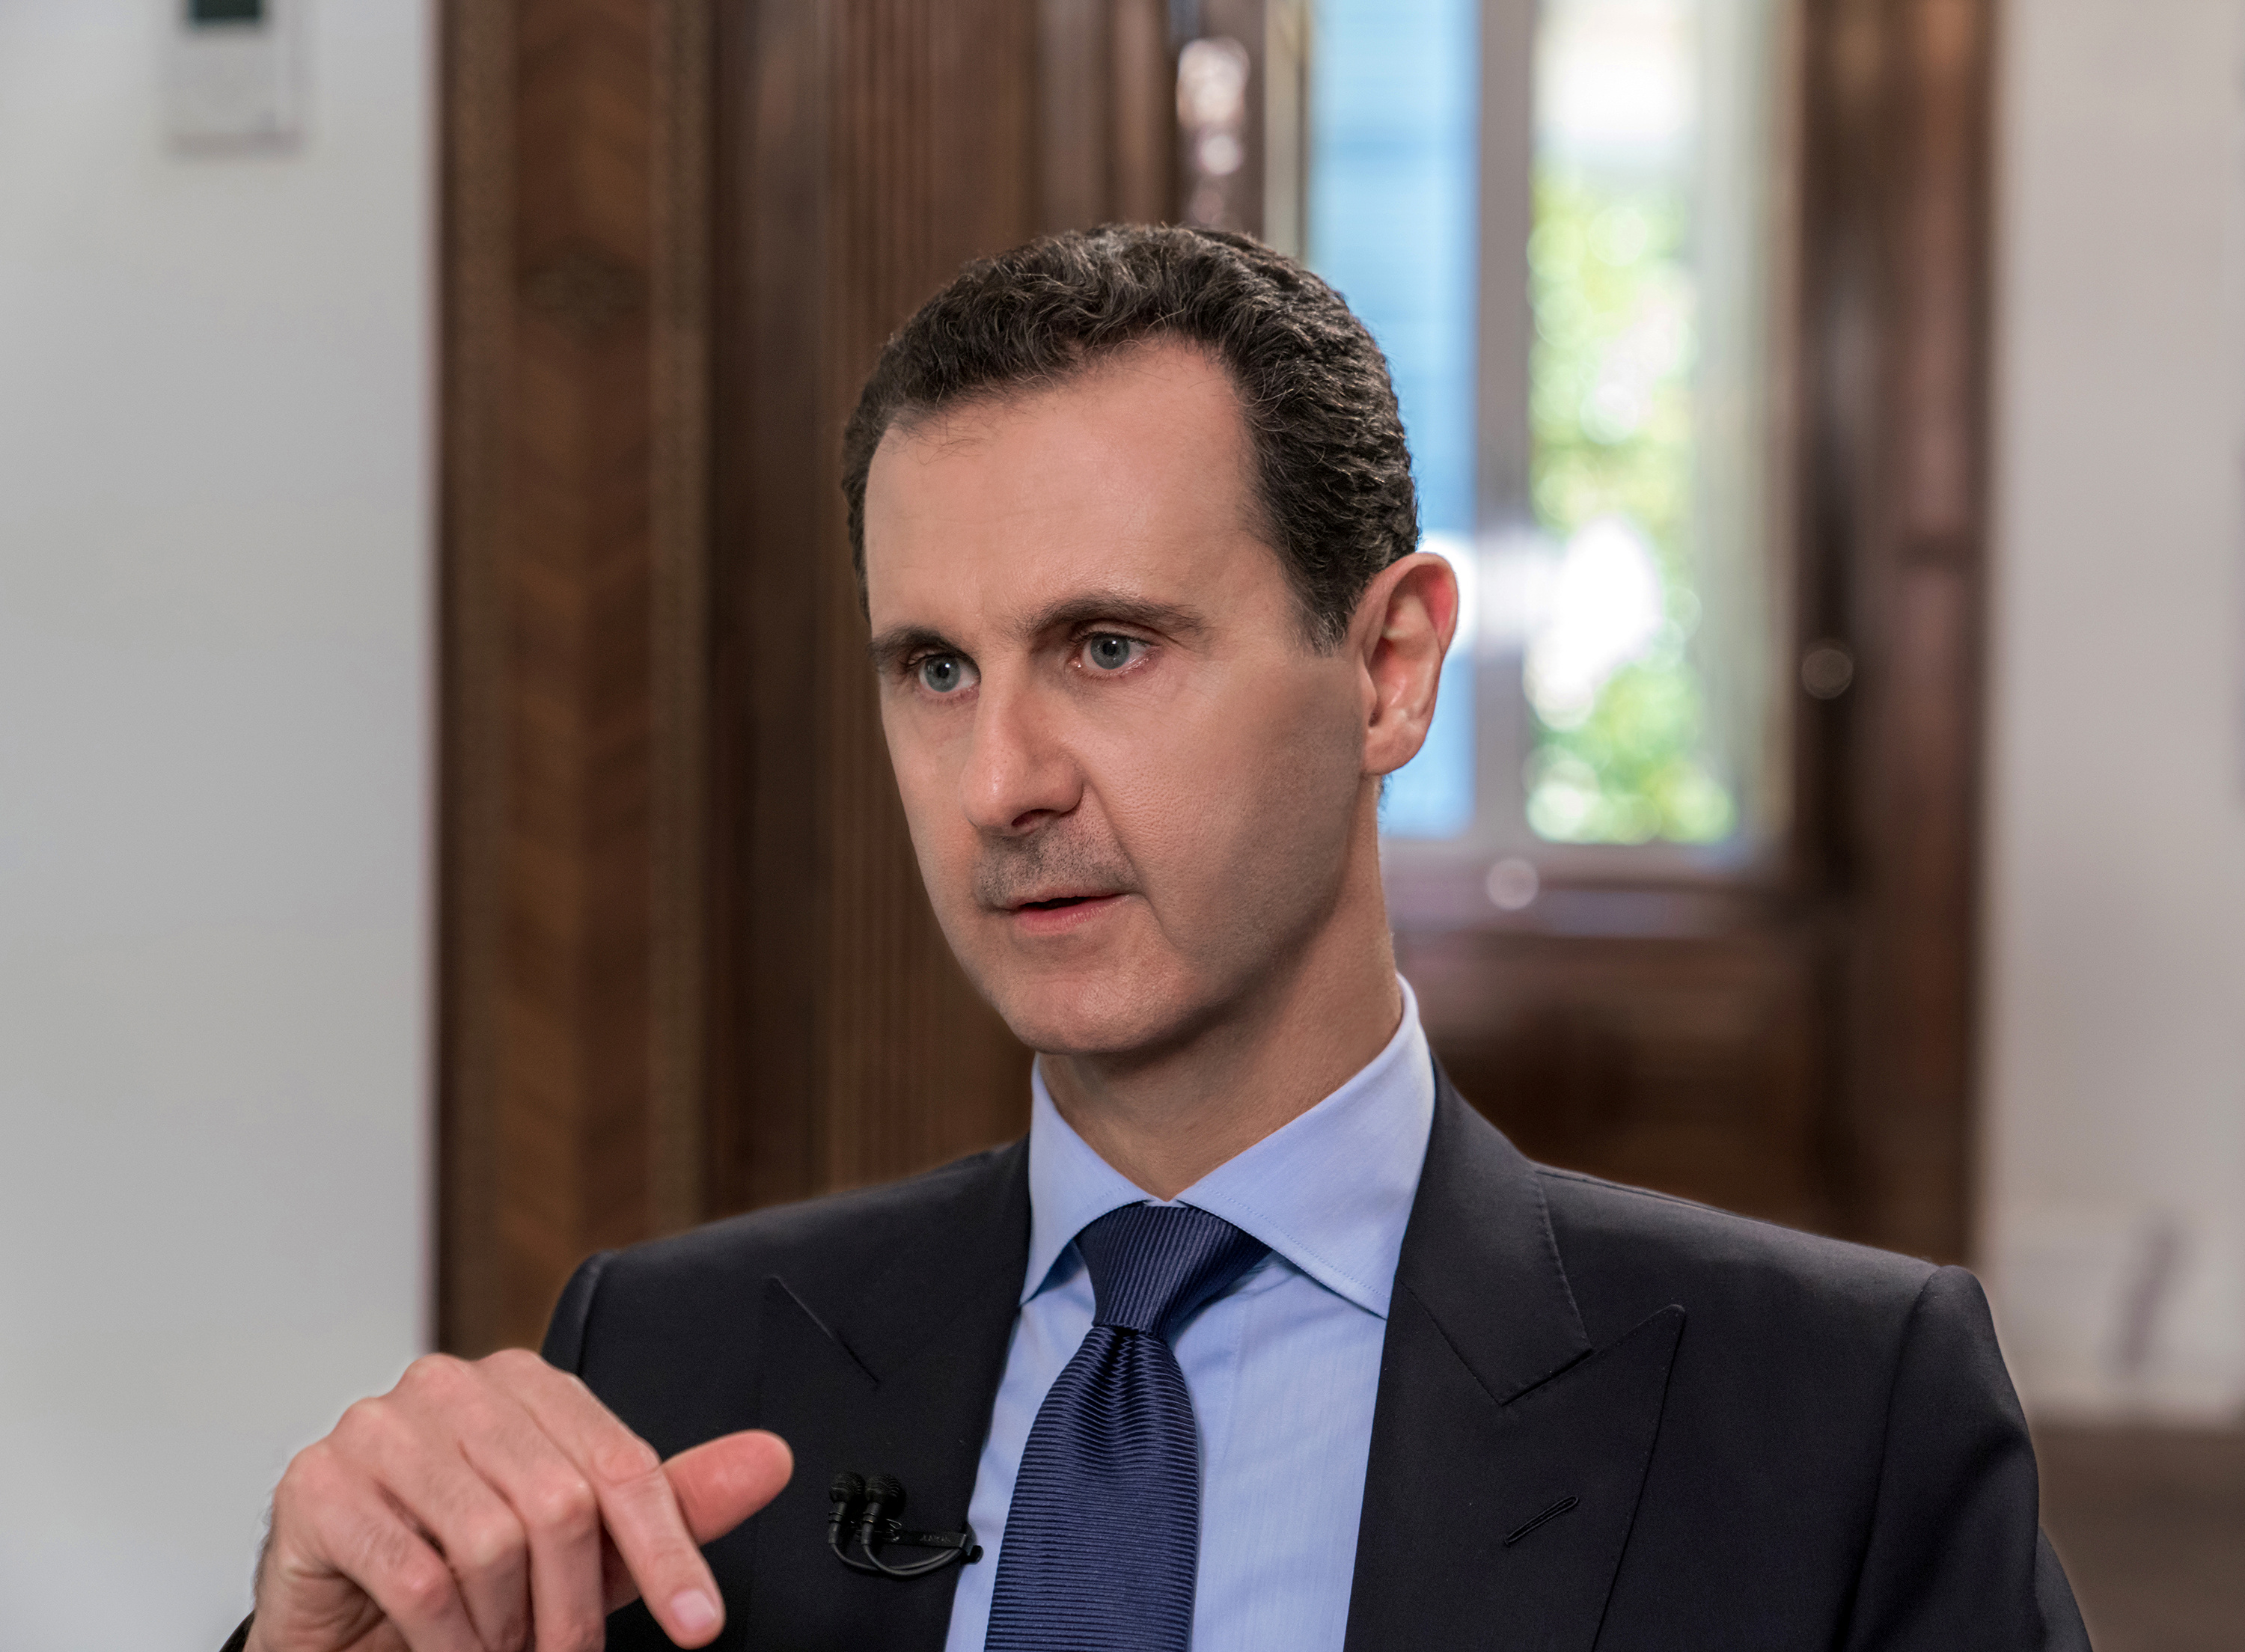 Syrian President Bashar al-Assad attends an interview with Russian television channel NTV, in Damascus, Syria in this handout released on June 24, 2018. SANA/Handout via REUTERS